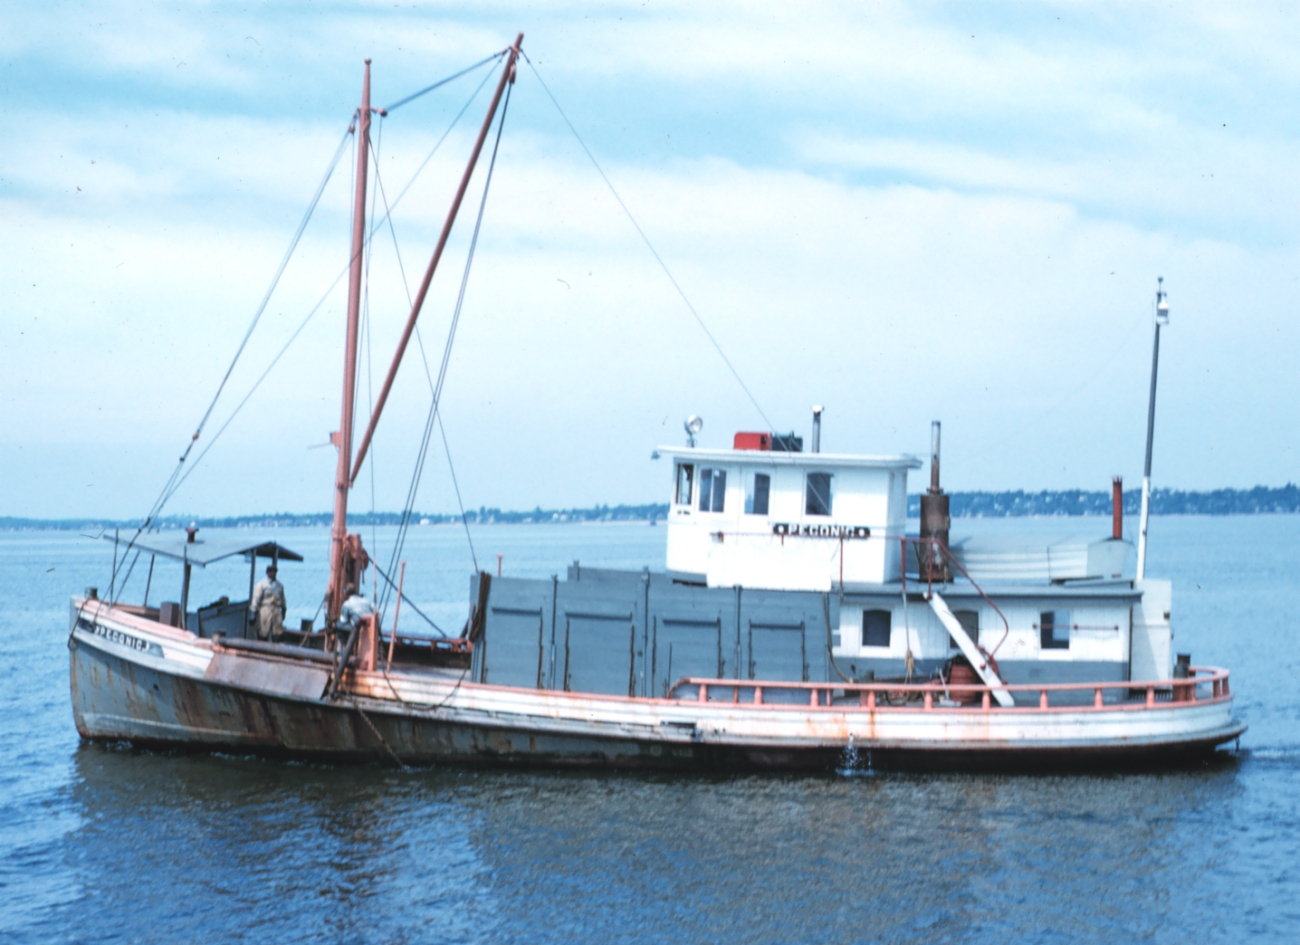 A Long Island Sound oyster boat